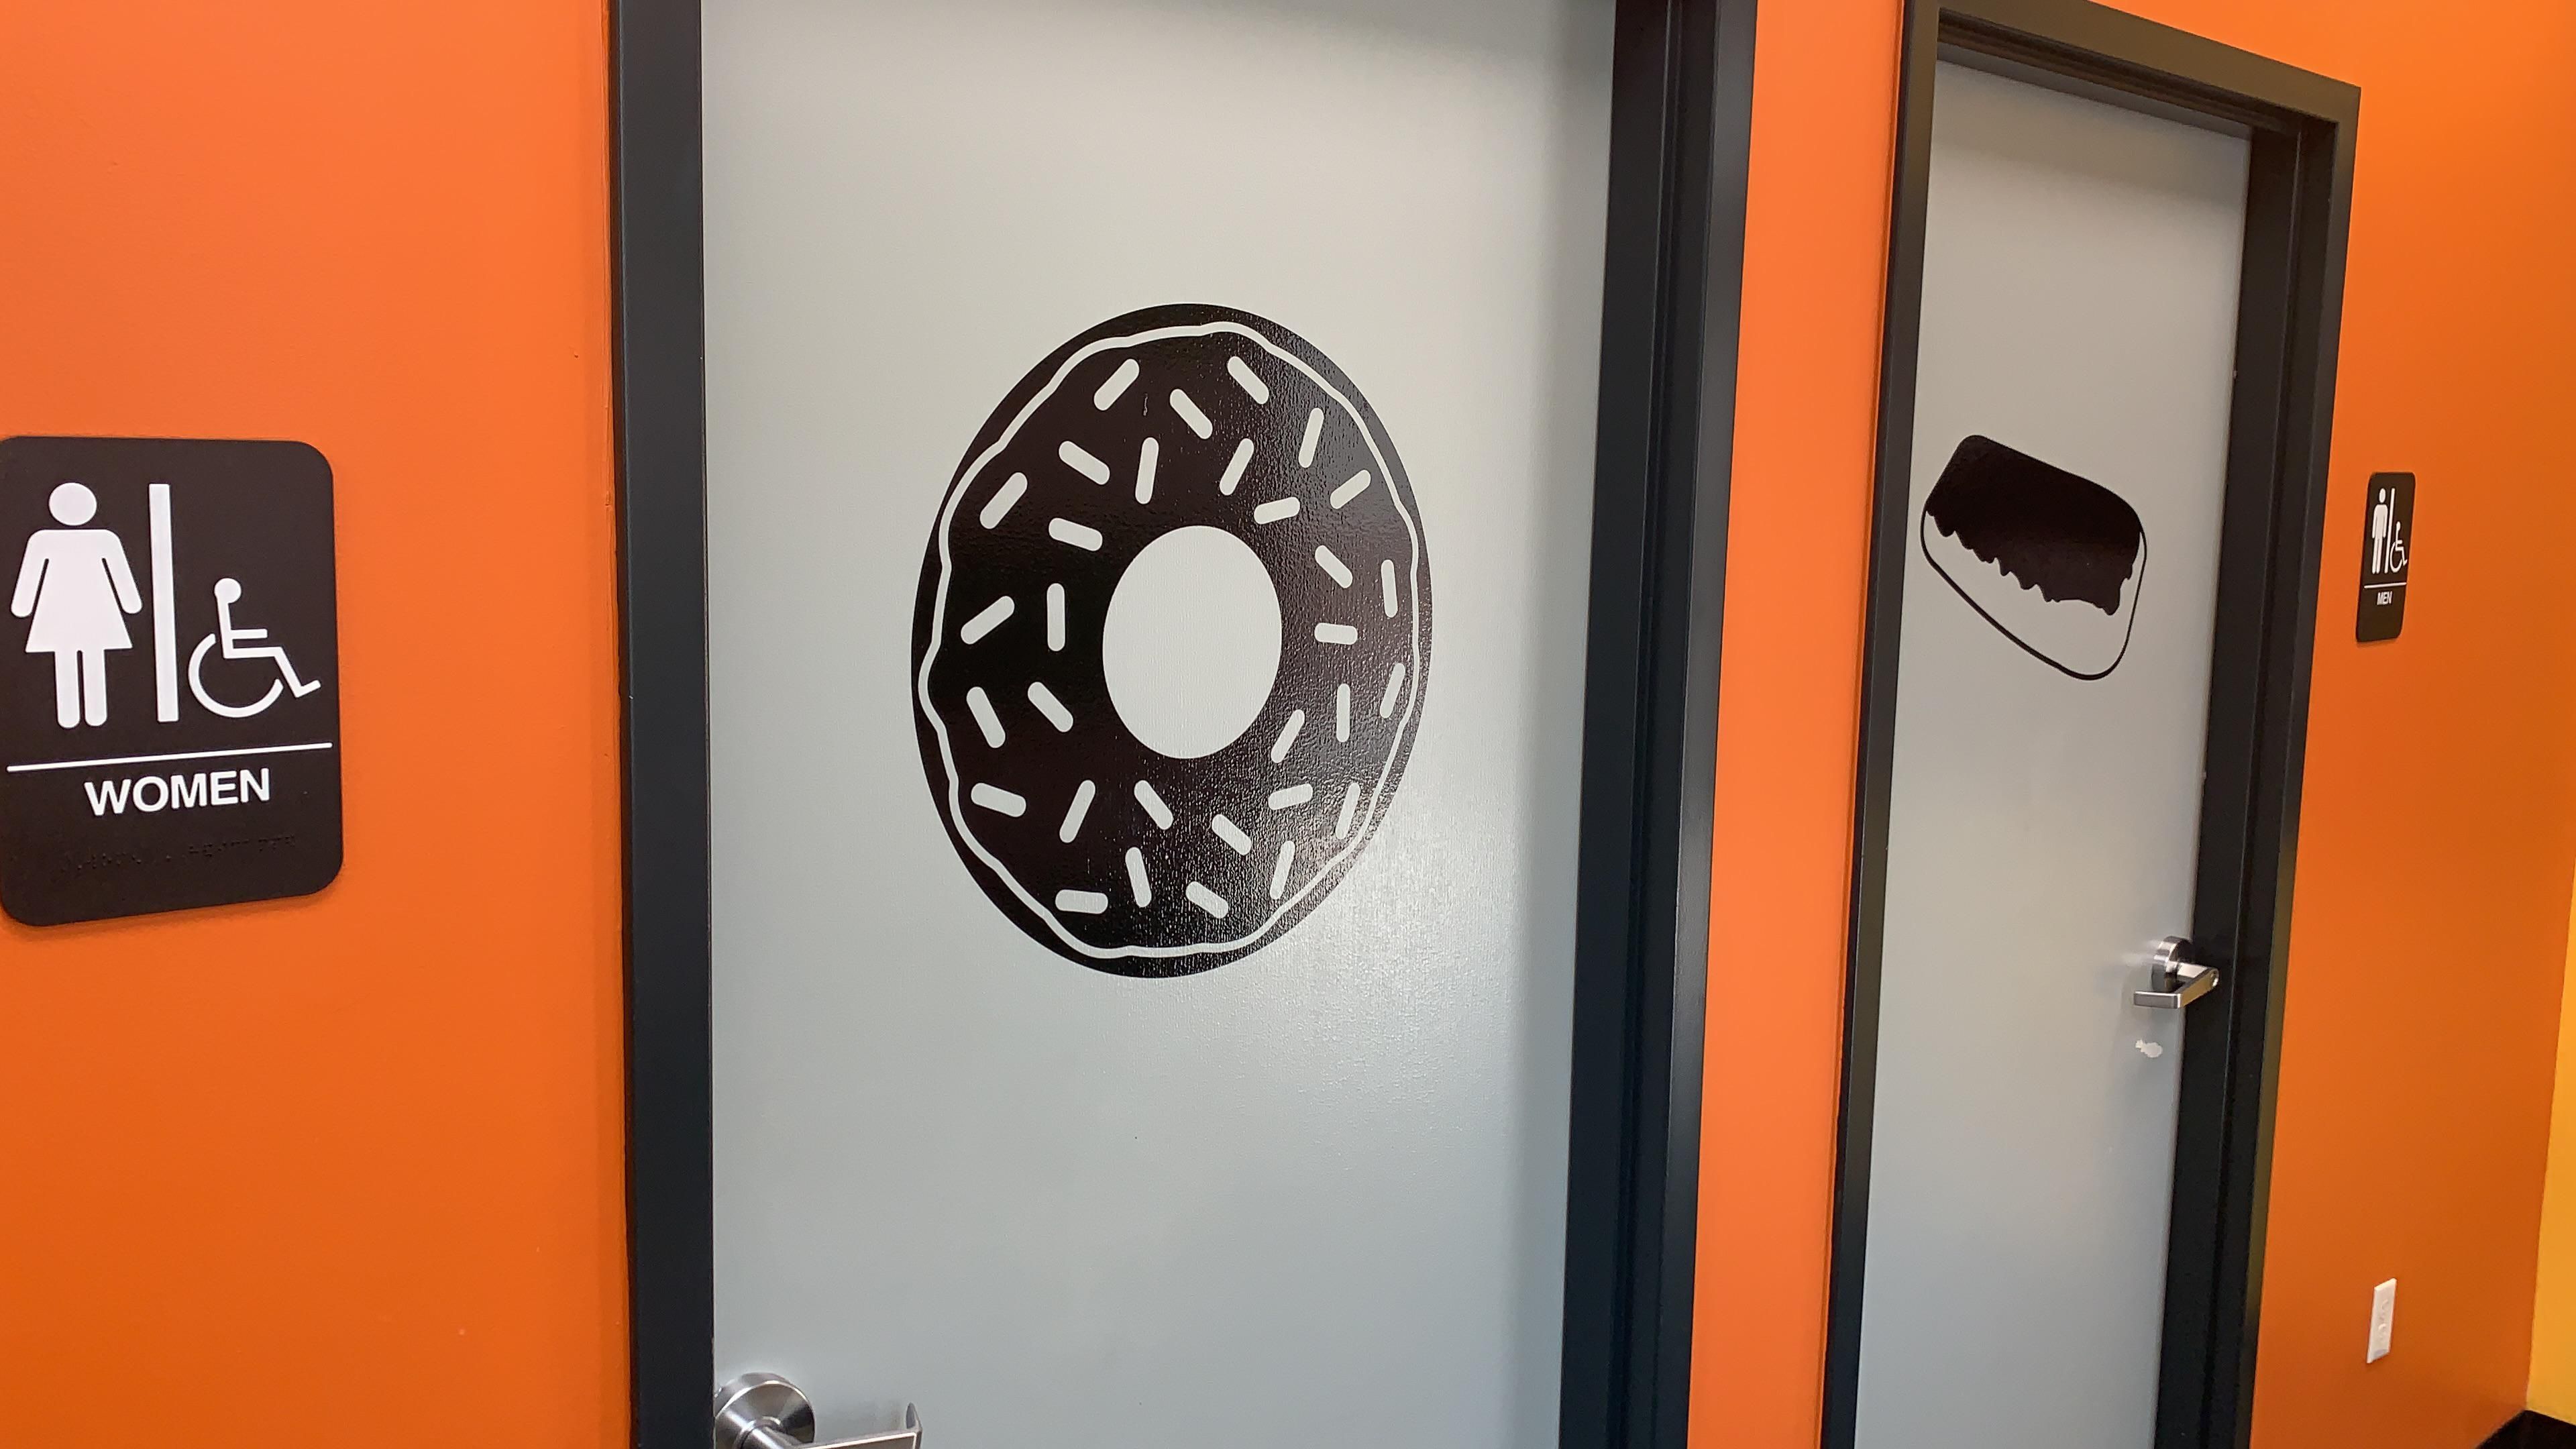 The Bathrooms at this donut shop